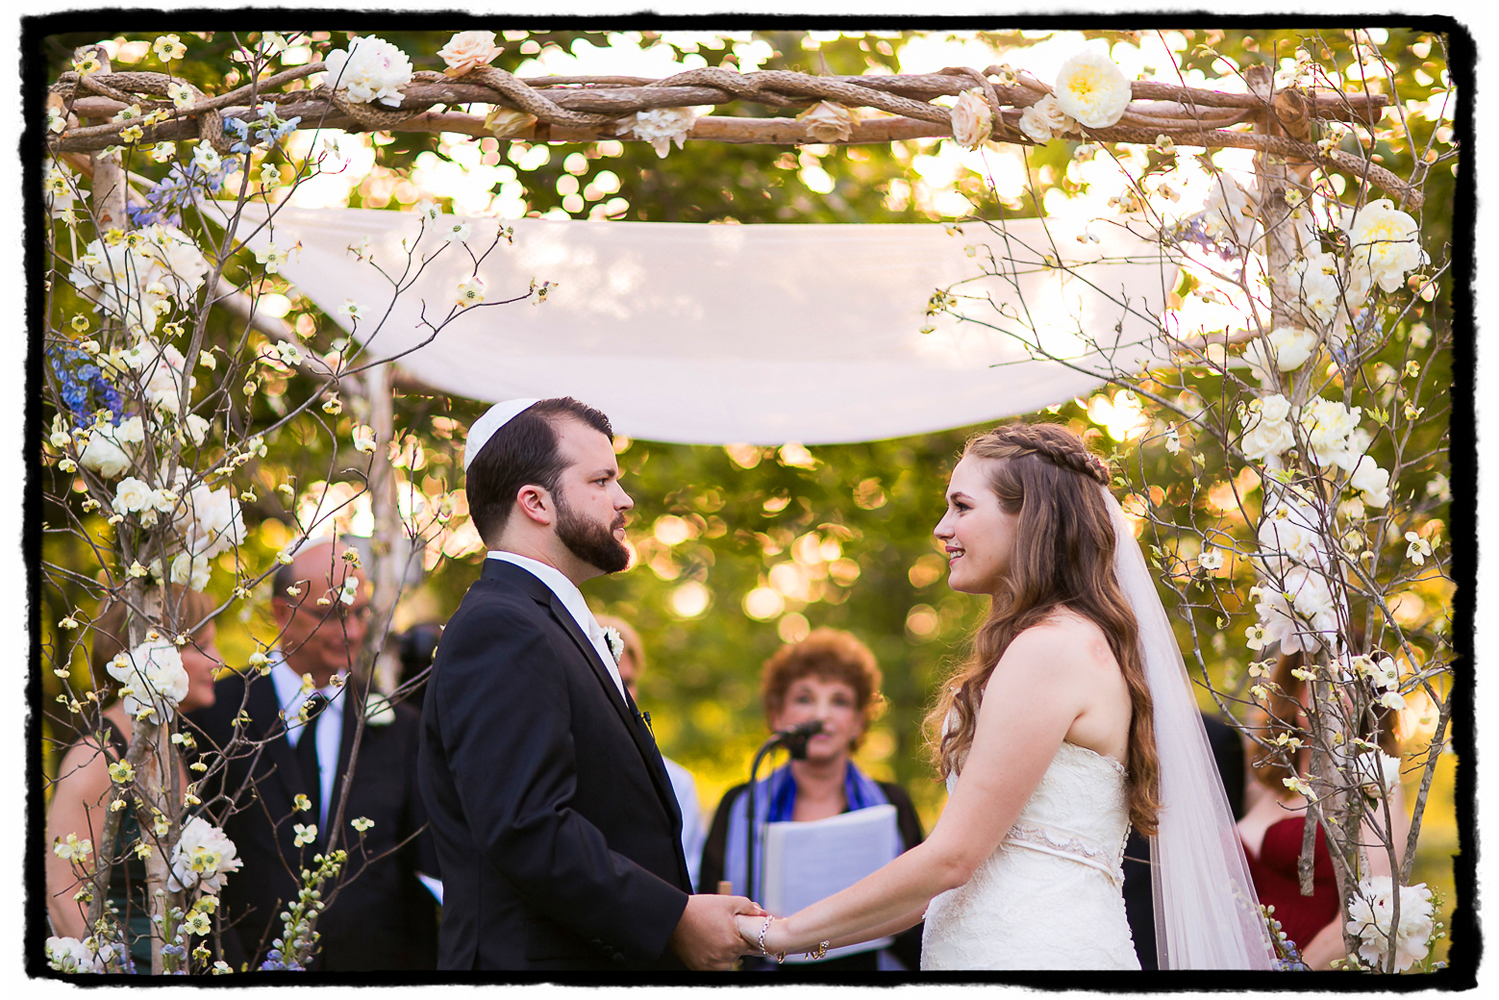 Alex & Will tie the knot under a floral Chuppah by Rebecca Sheperd at The Palm House at Brooklyn Botanic Garden.